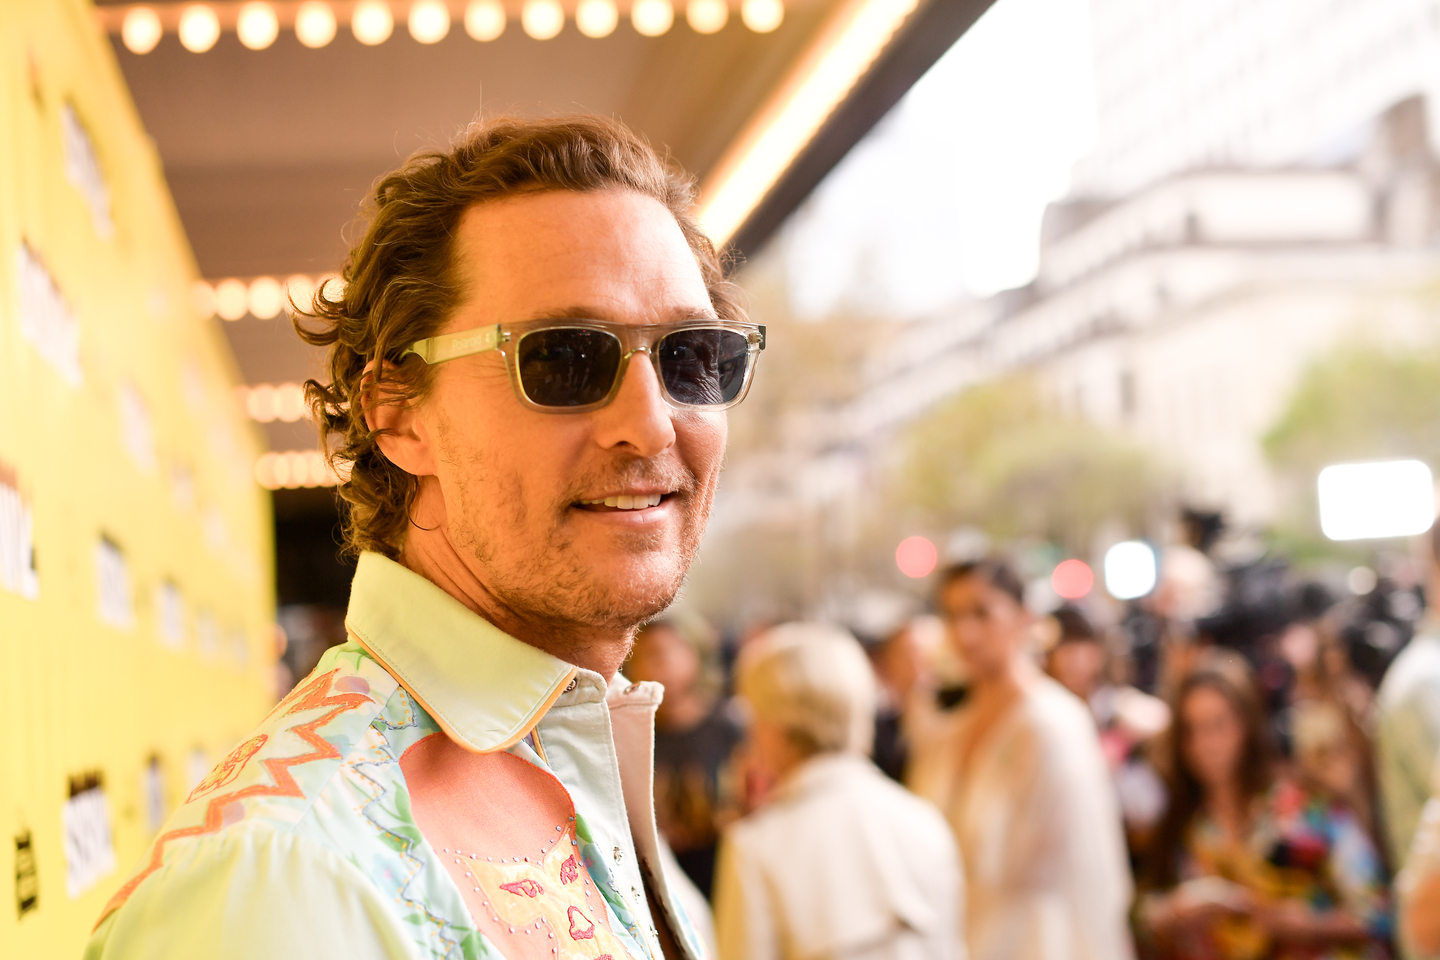 Matthew McConaughey attends The Beach Bum Premiere at the Paramount Theatre.